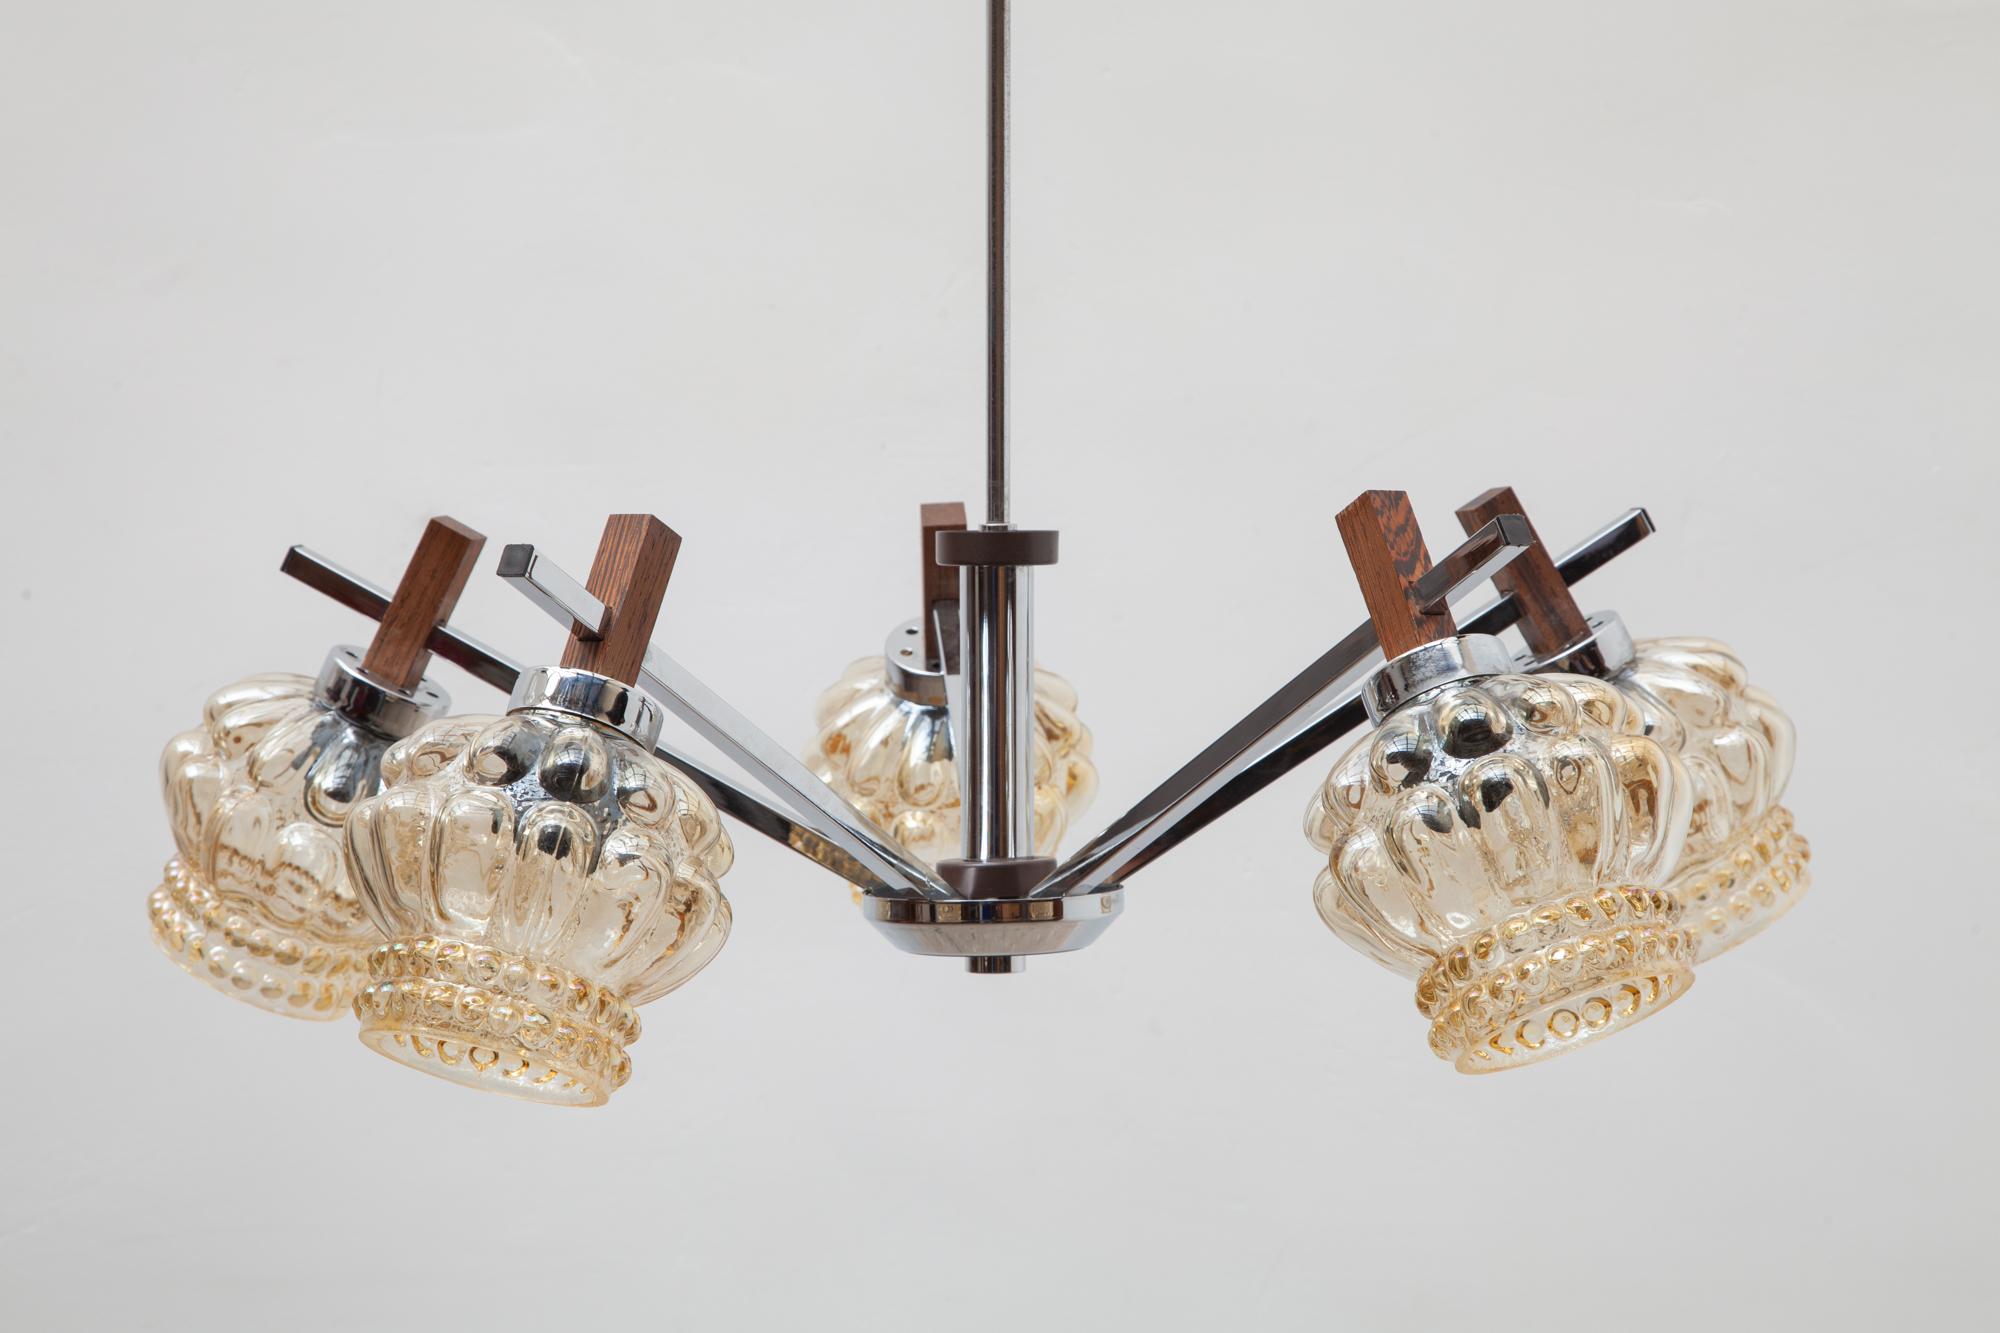 Vintage chandelier by Paavo Tynell for Limburg, Germany. Modern chrome and wood frame with shades of opalescent yellow bubble glass. Lit by 5 bulbs.
Dimension. Chandelier 75 W x 65 H x 75 D cm.